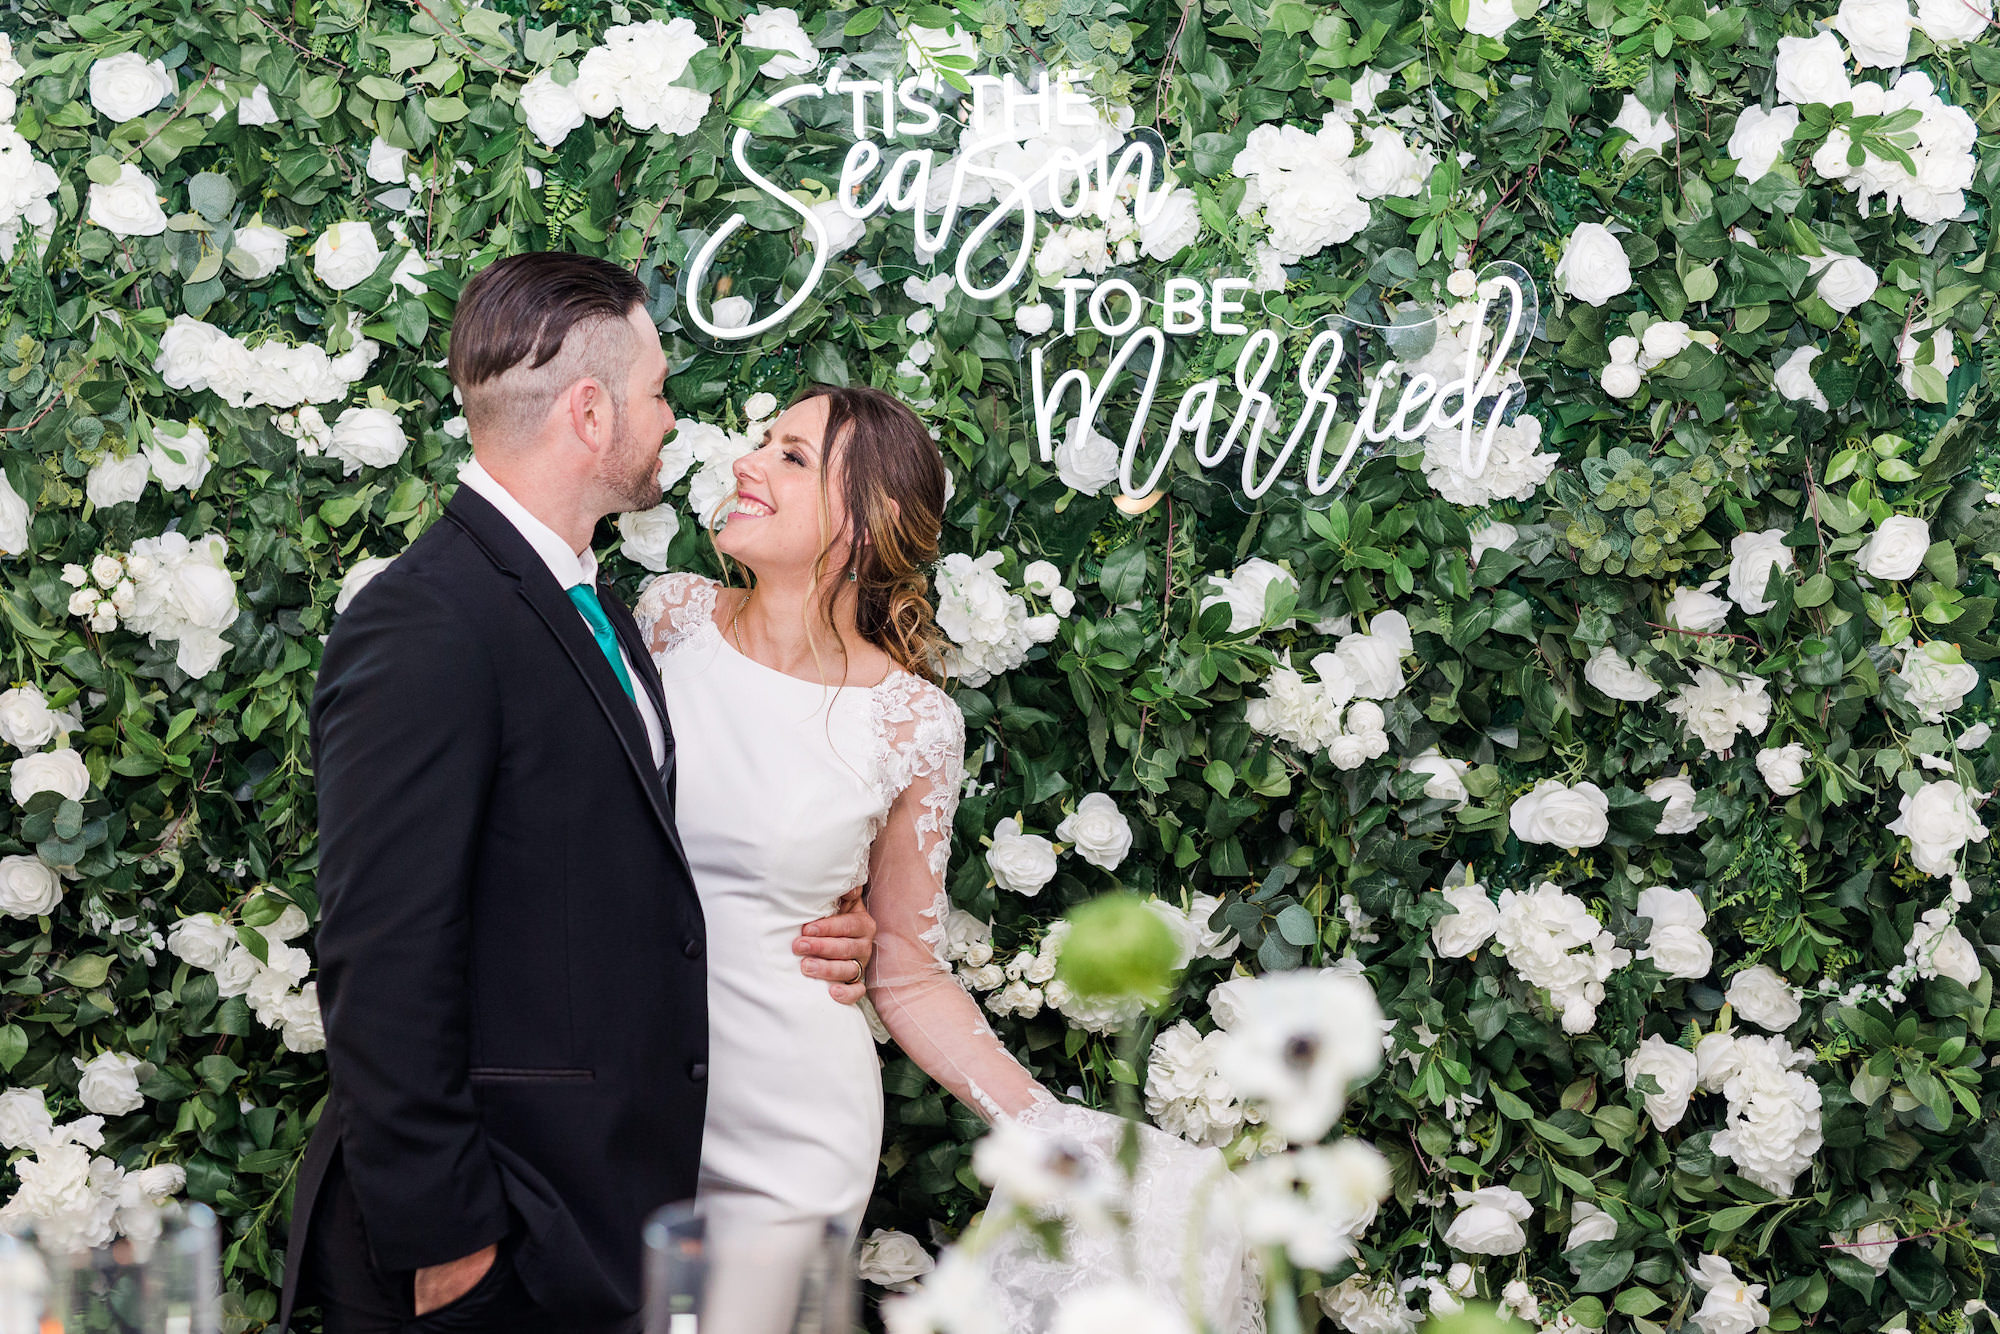 Winter Modern Whimsical Wedding Styled Shoot, Bride Wearing Long Sleeve Lace and Illusion Sleek Wedding Dress with Groom, Greenery and White Roses, Hydrangeas Lush Floral Wall Backdrop with White Neon Sign | Tampa Bay Wedding Planner MDP Events Planning | Wedding Dress Truly Forever Bridal Tampa